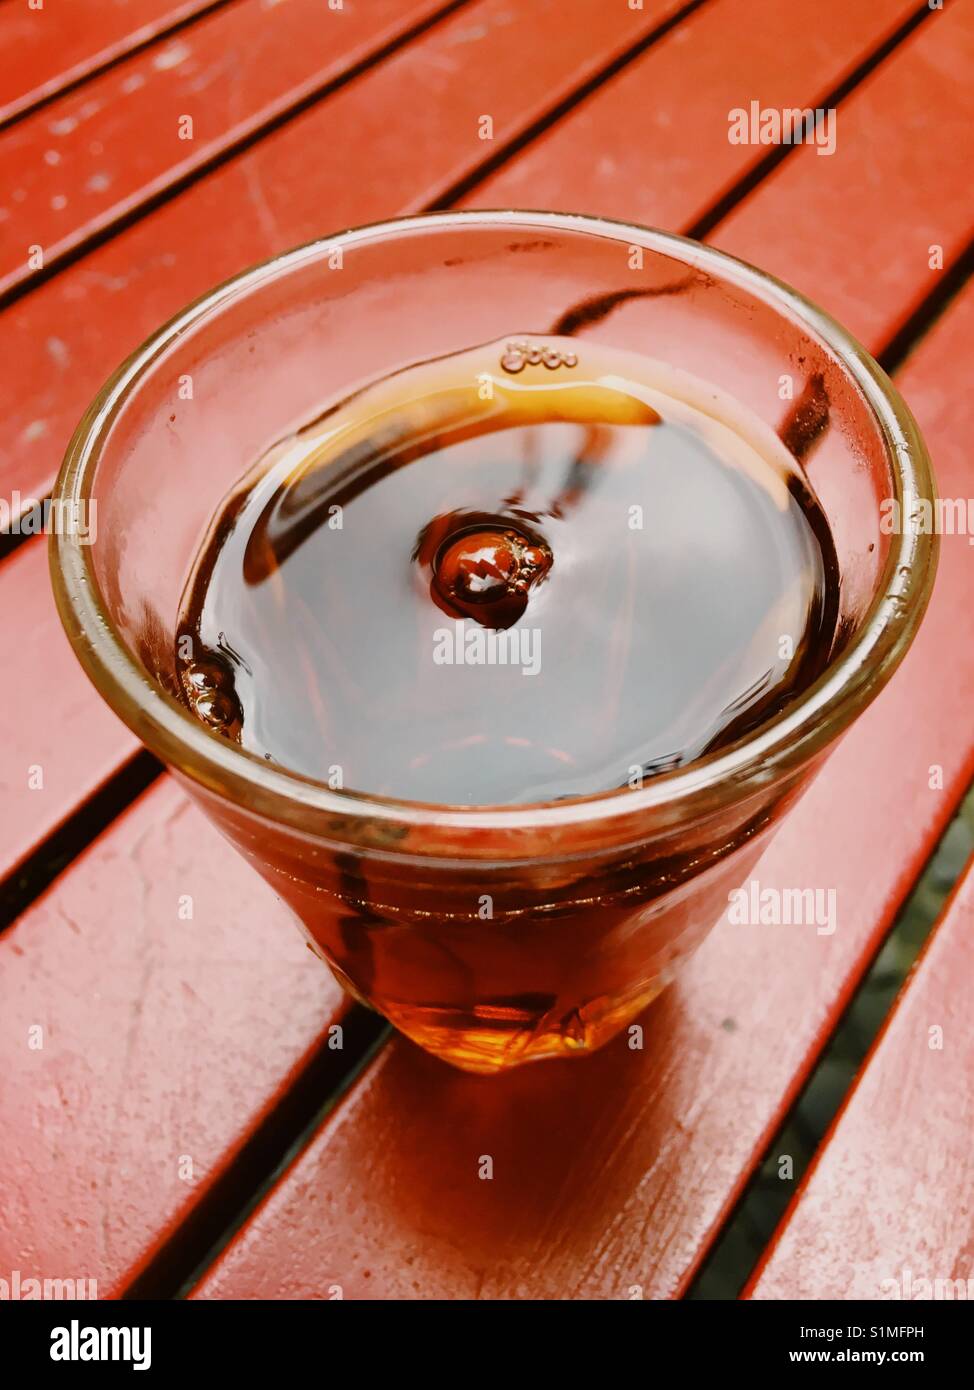 A Glass of black tea on a red wooden table Stock Photo